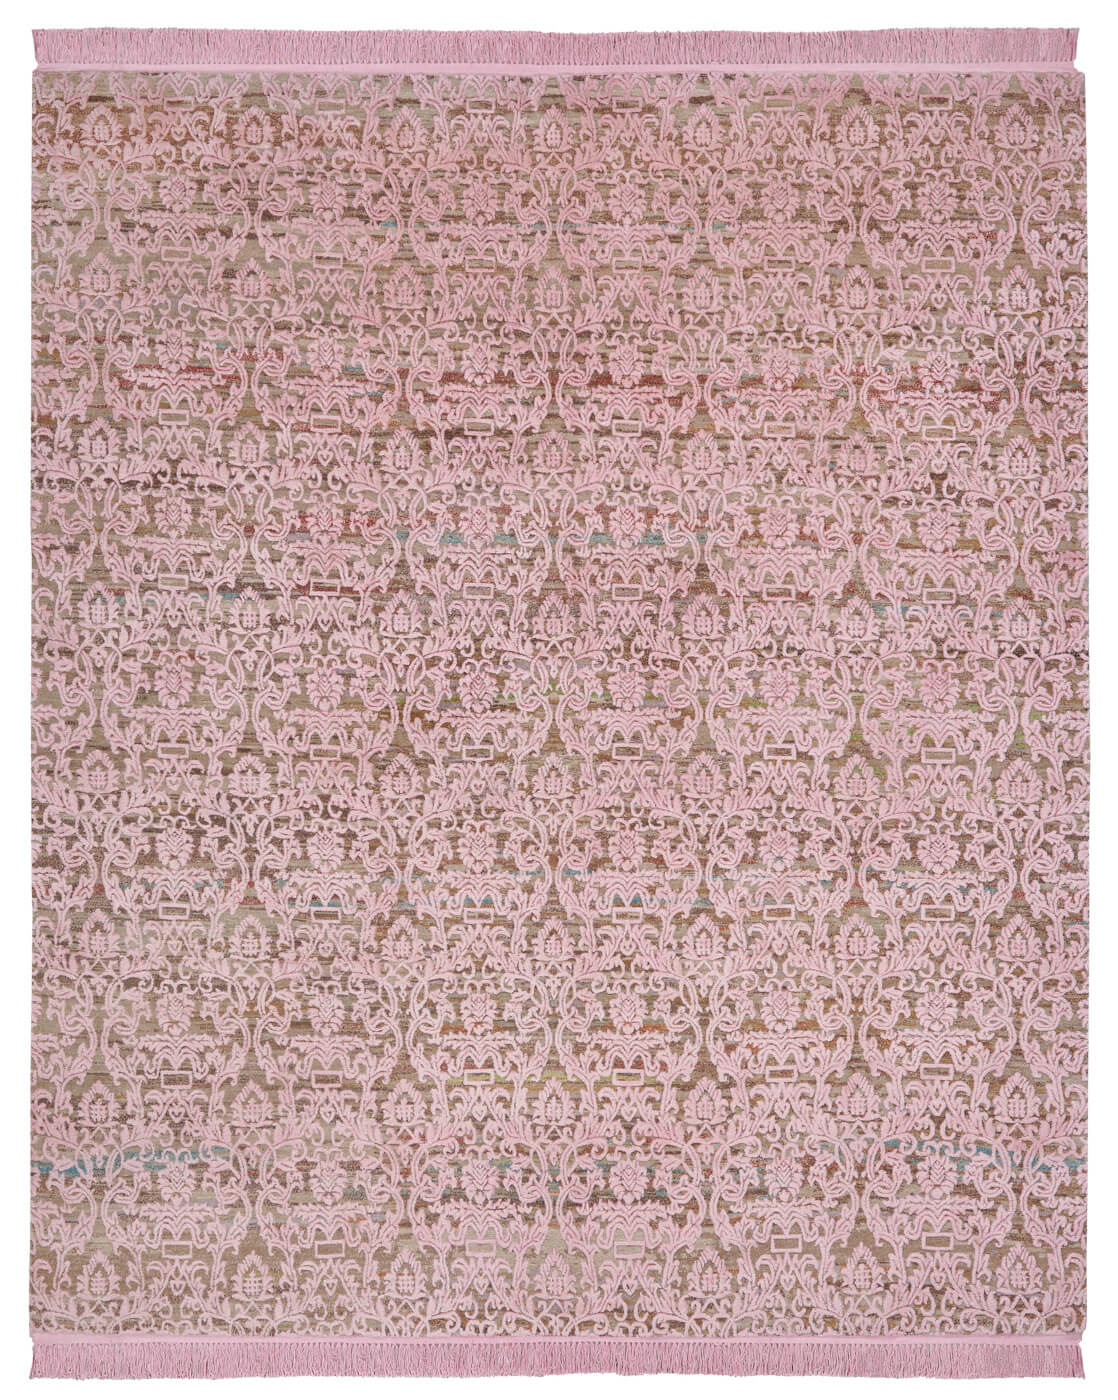 Hand-woven Vintage Style Violet Luxury Rug ☞ Size: 200 x 300 cm